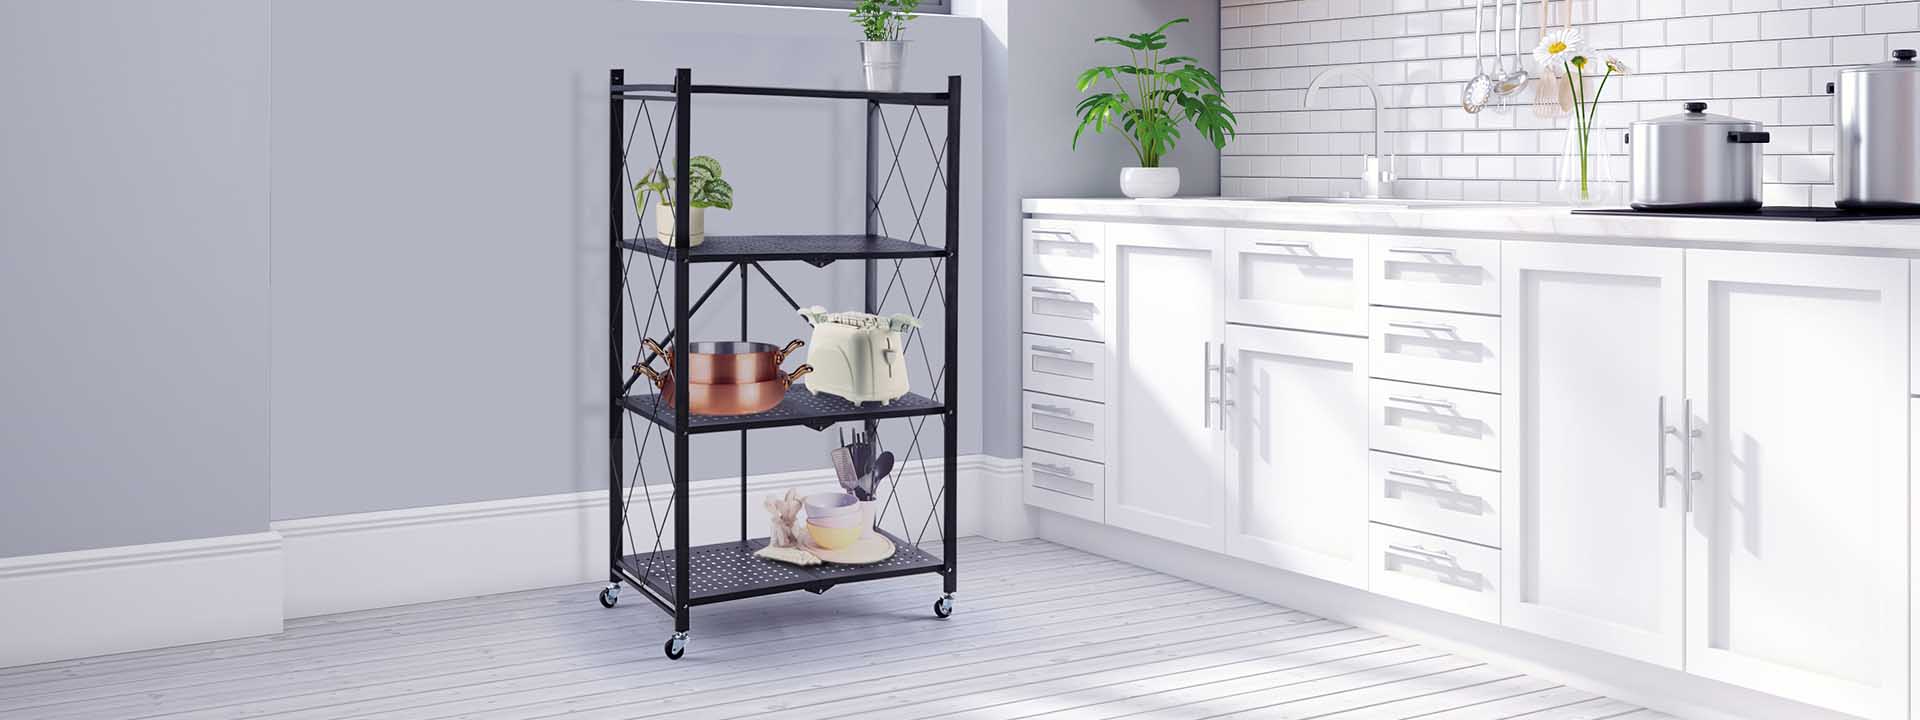 One shelf, different functionalities. What can you do with a Catterhouse shelf?